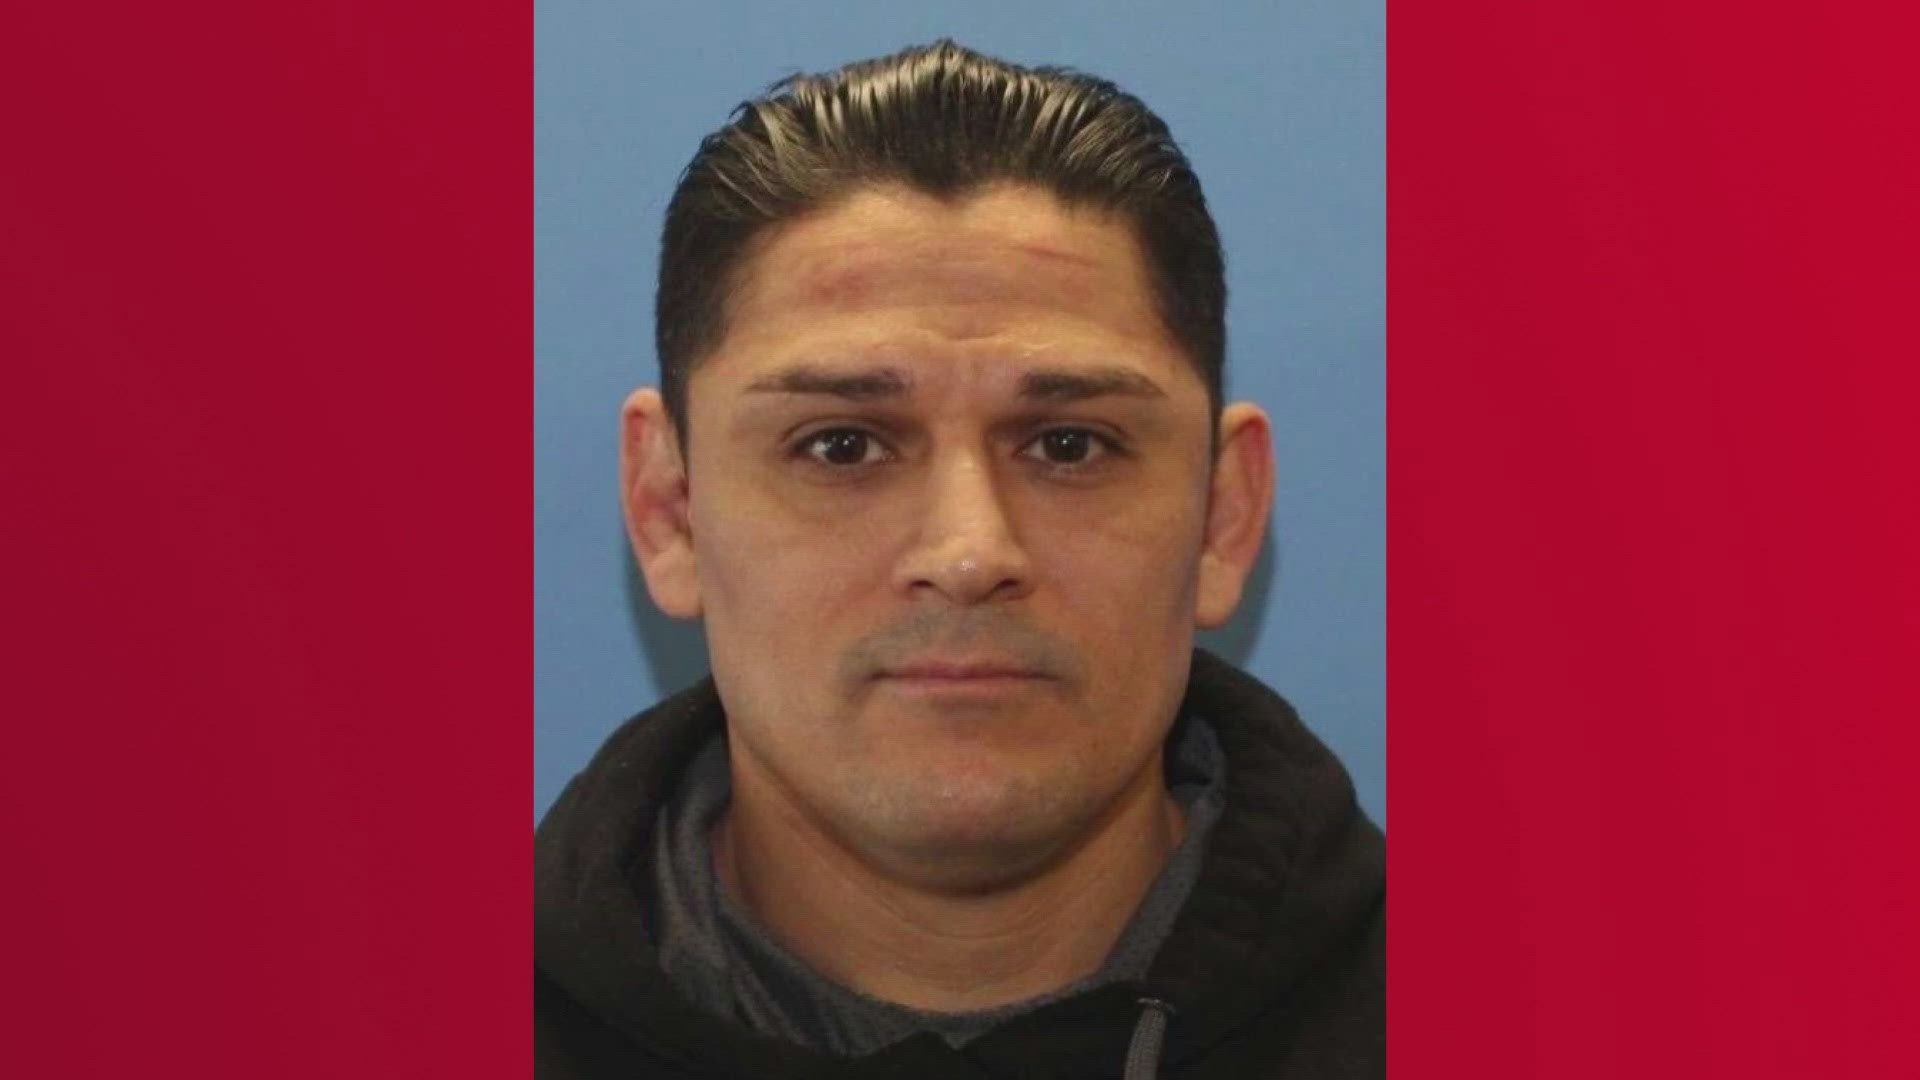 39-year-old Elias Huizar is suspected of murdering his ex-wife and girlfriend and abducting 1-year-old Roman Huizar